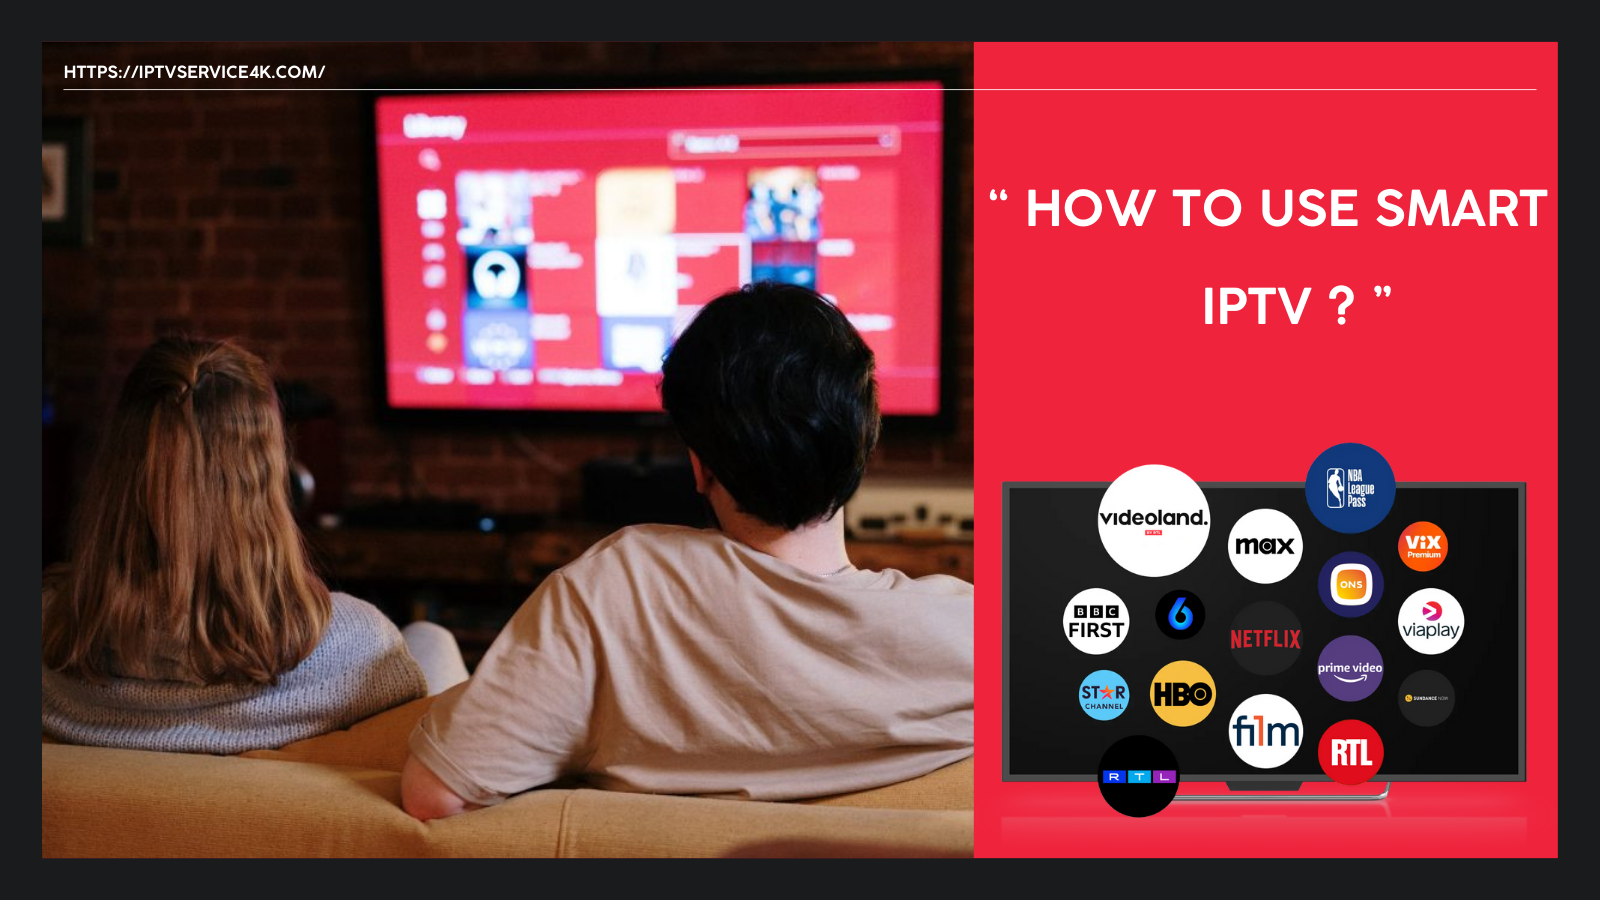 How to use Smart IPTV